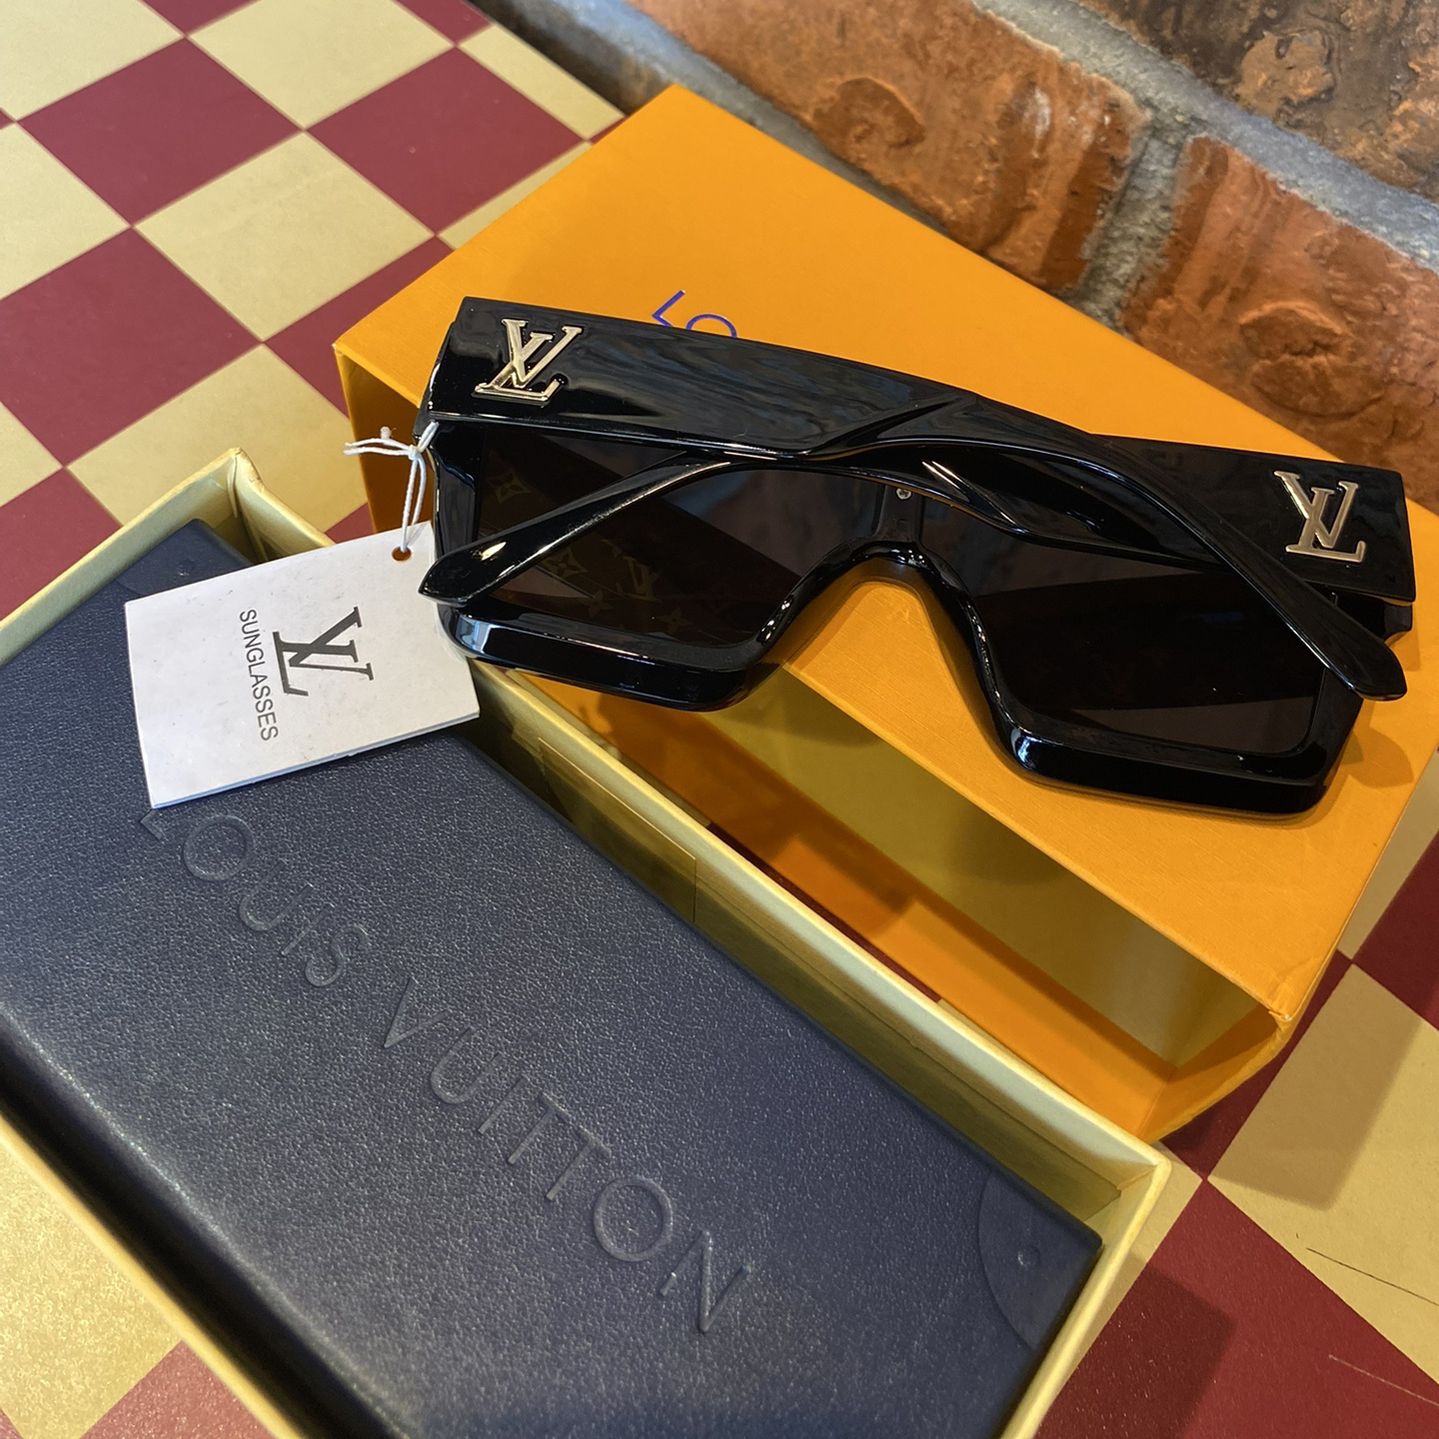 Loui Vuitton Sunglasses for Sale in Parkville, MO - OfferUp